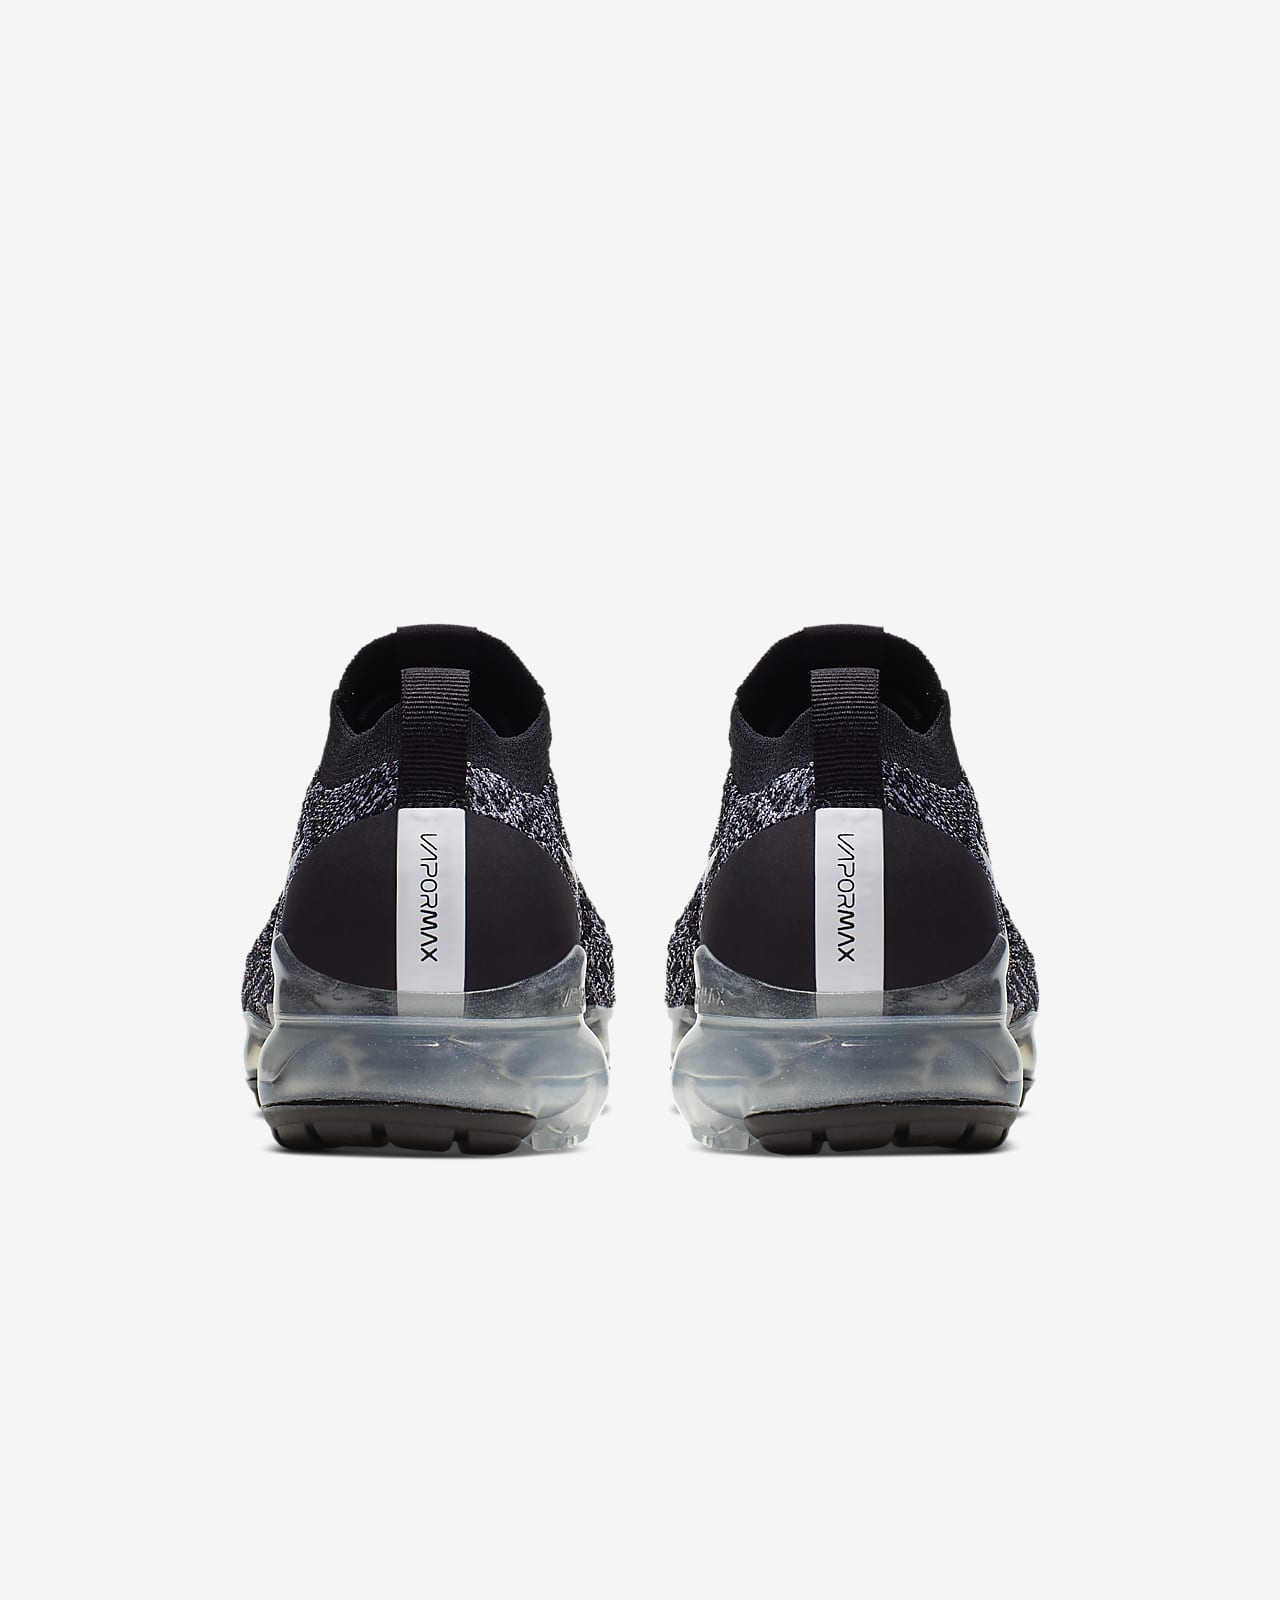 nike air vapormax flyknit 3 women's black and white